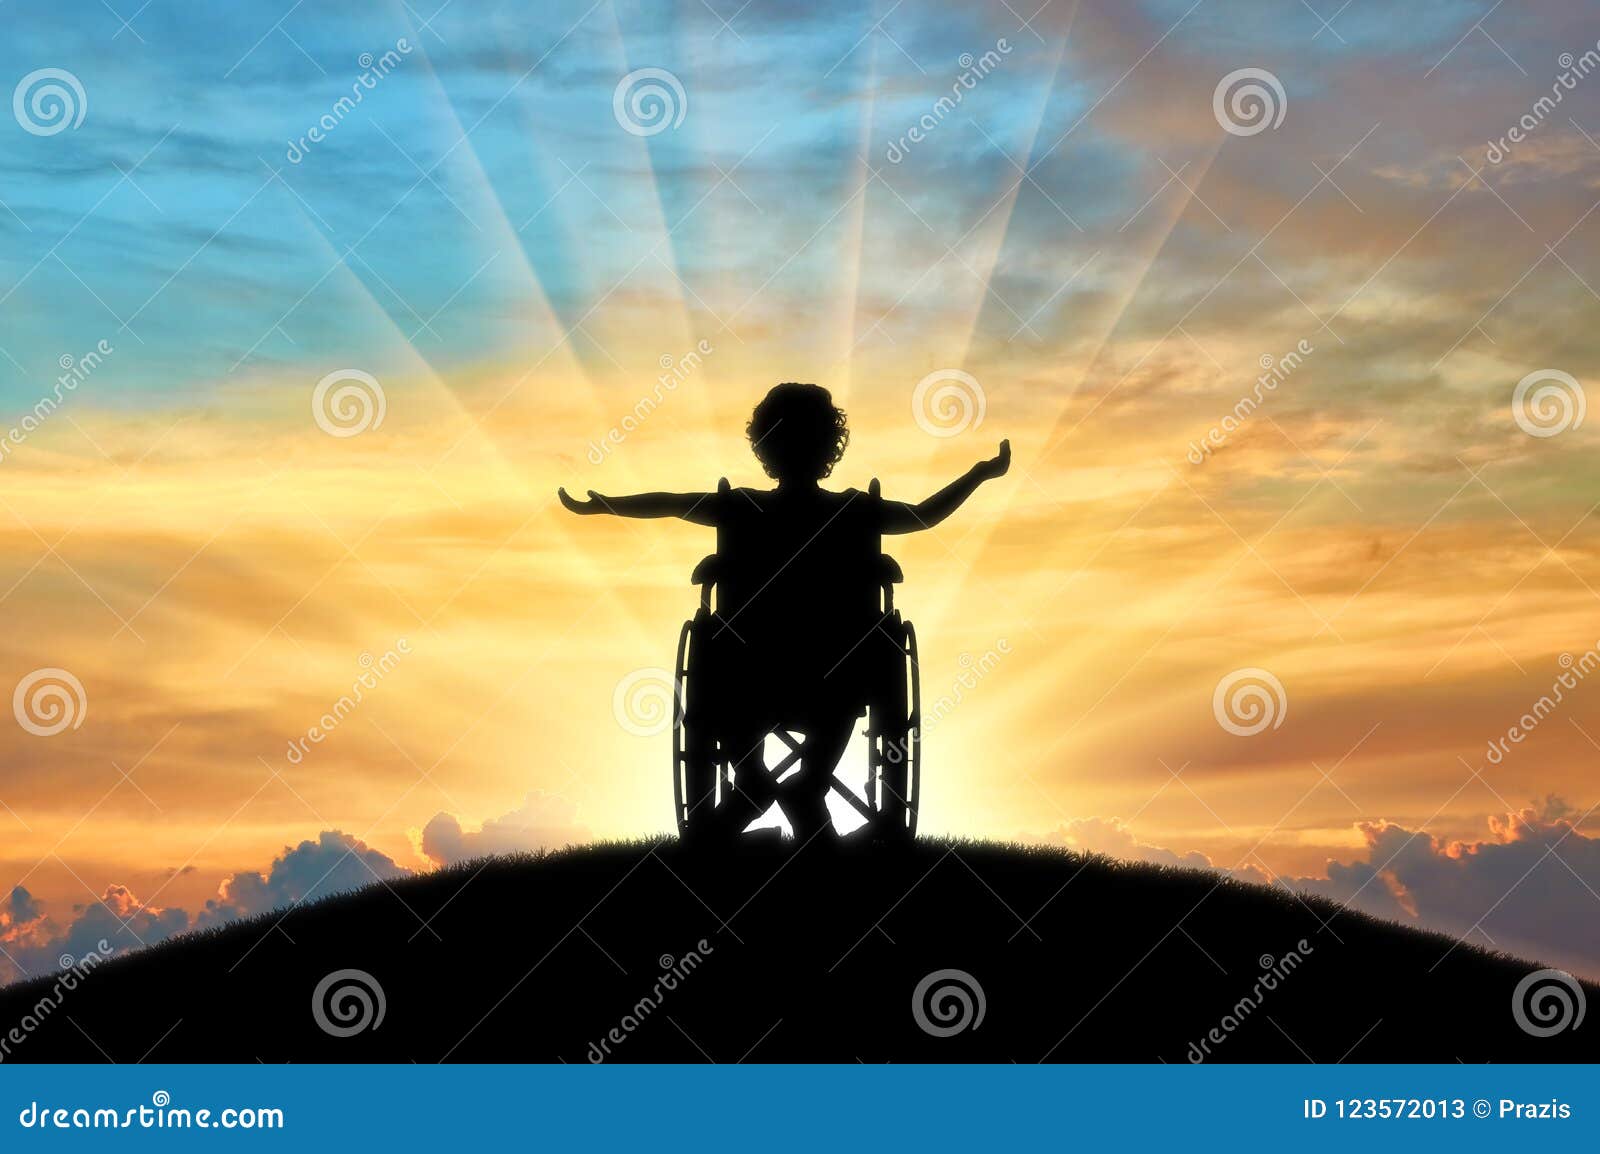 silhouette of a happy disabled child girl sitting in a wheelchair atop a hill at sunset